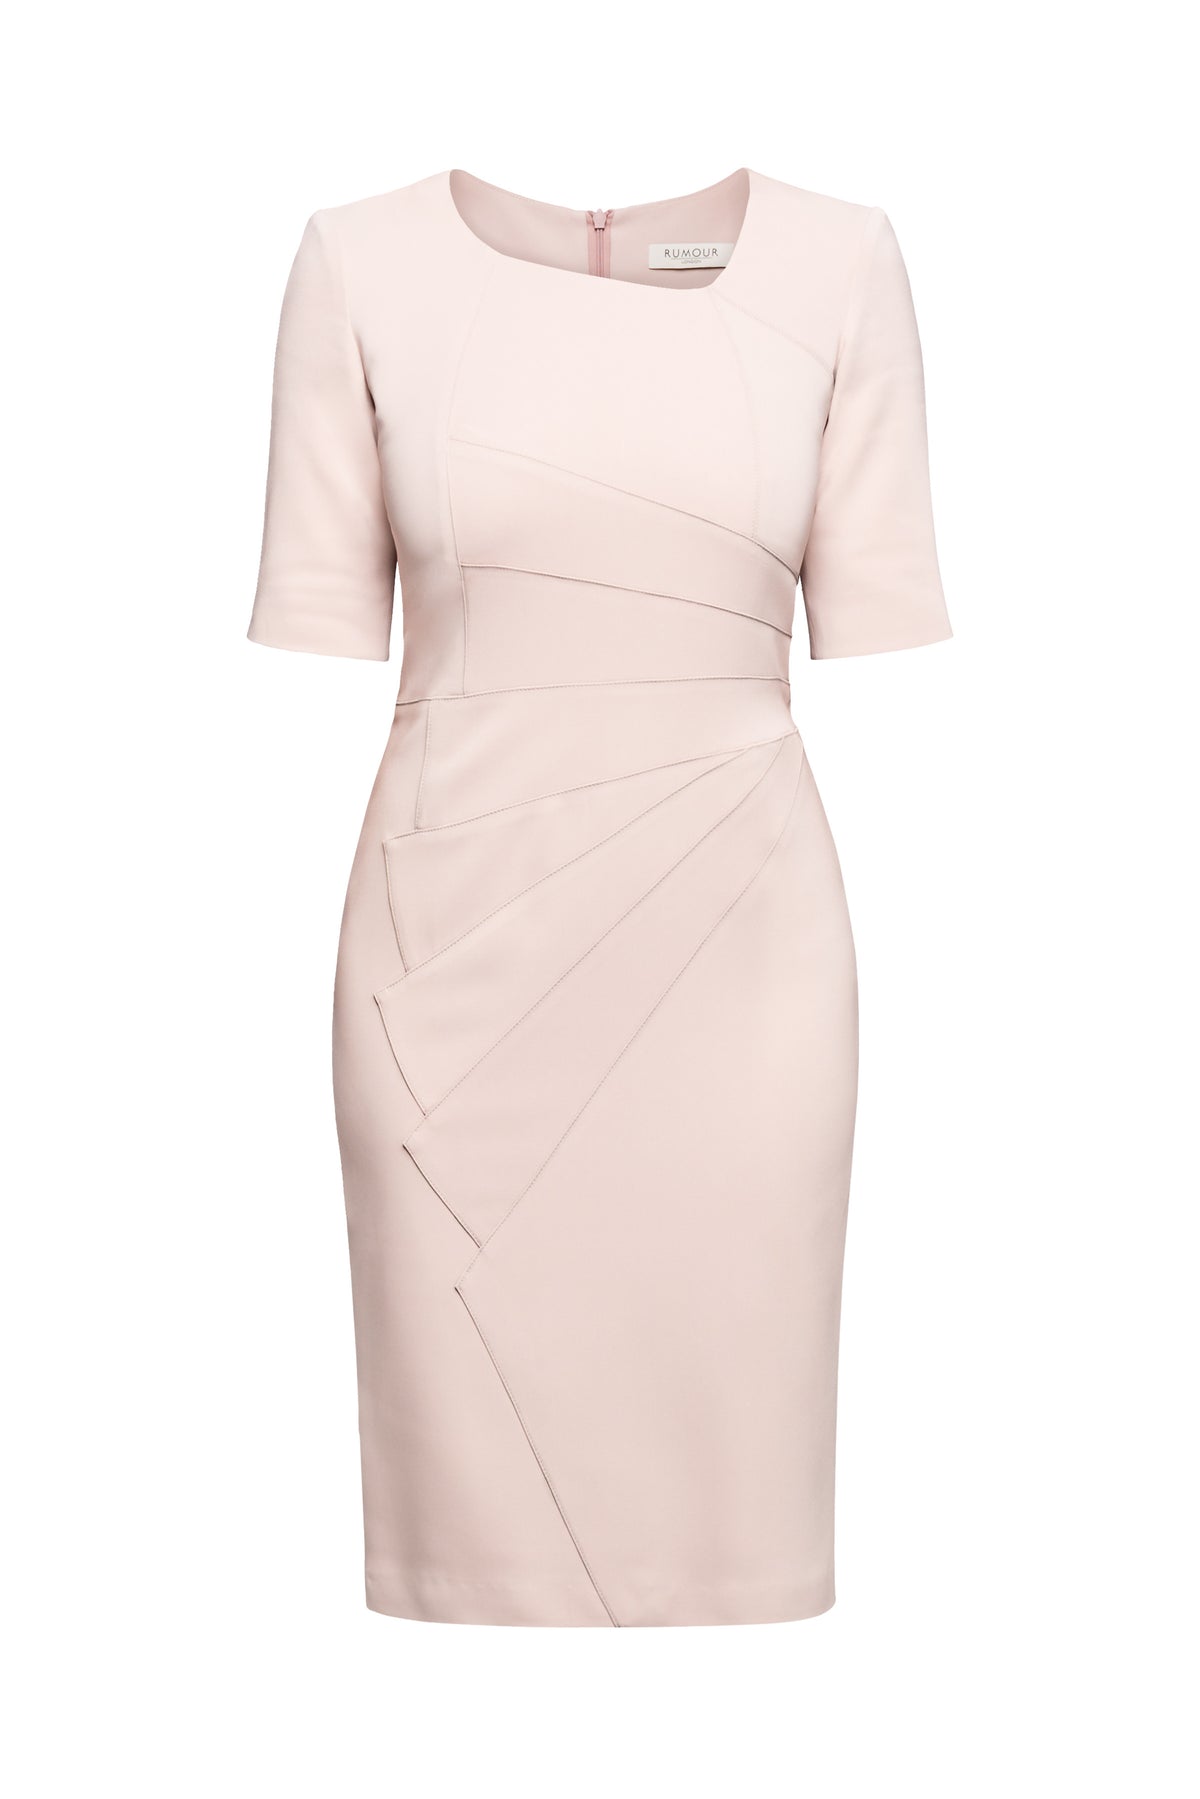 Powder Pink Fitted Knee Length Dress with Asymmetrical Neckline